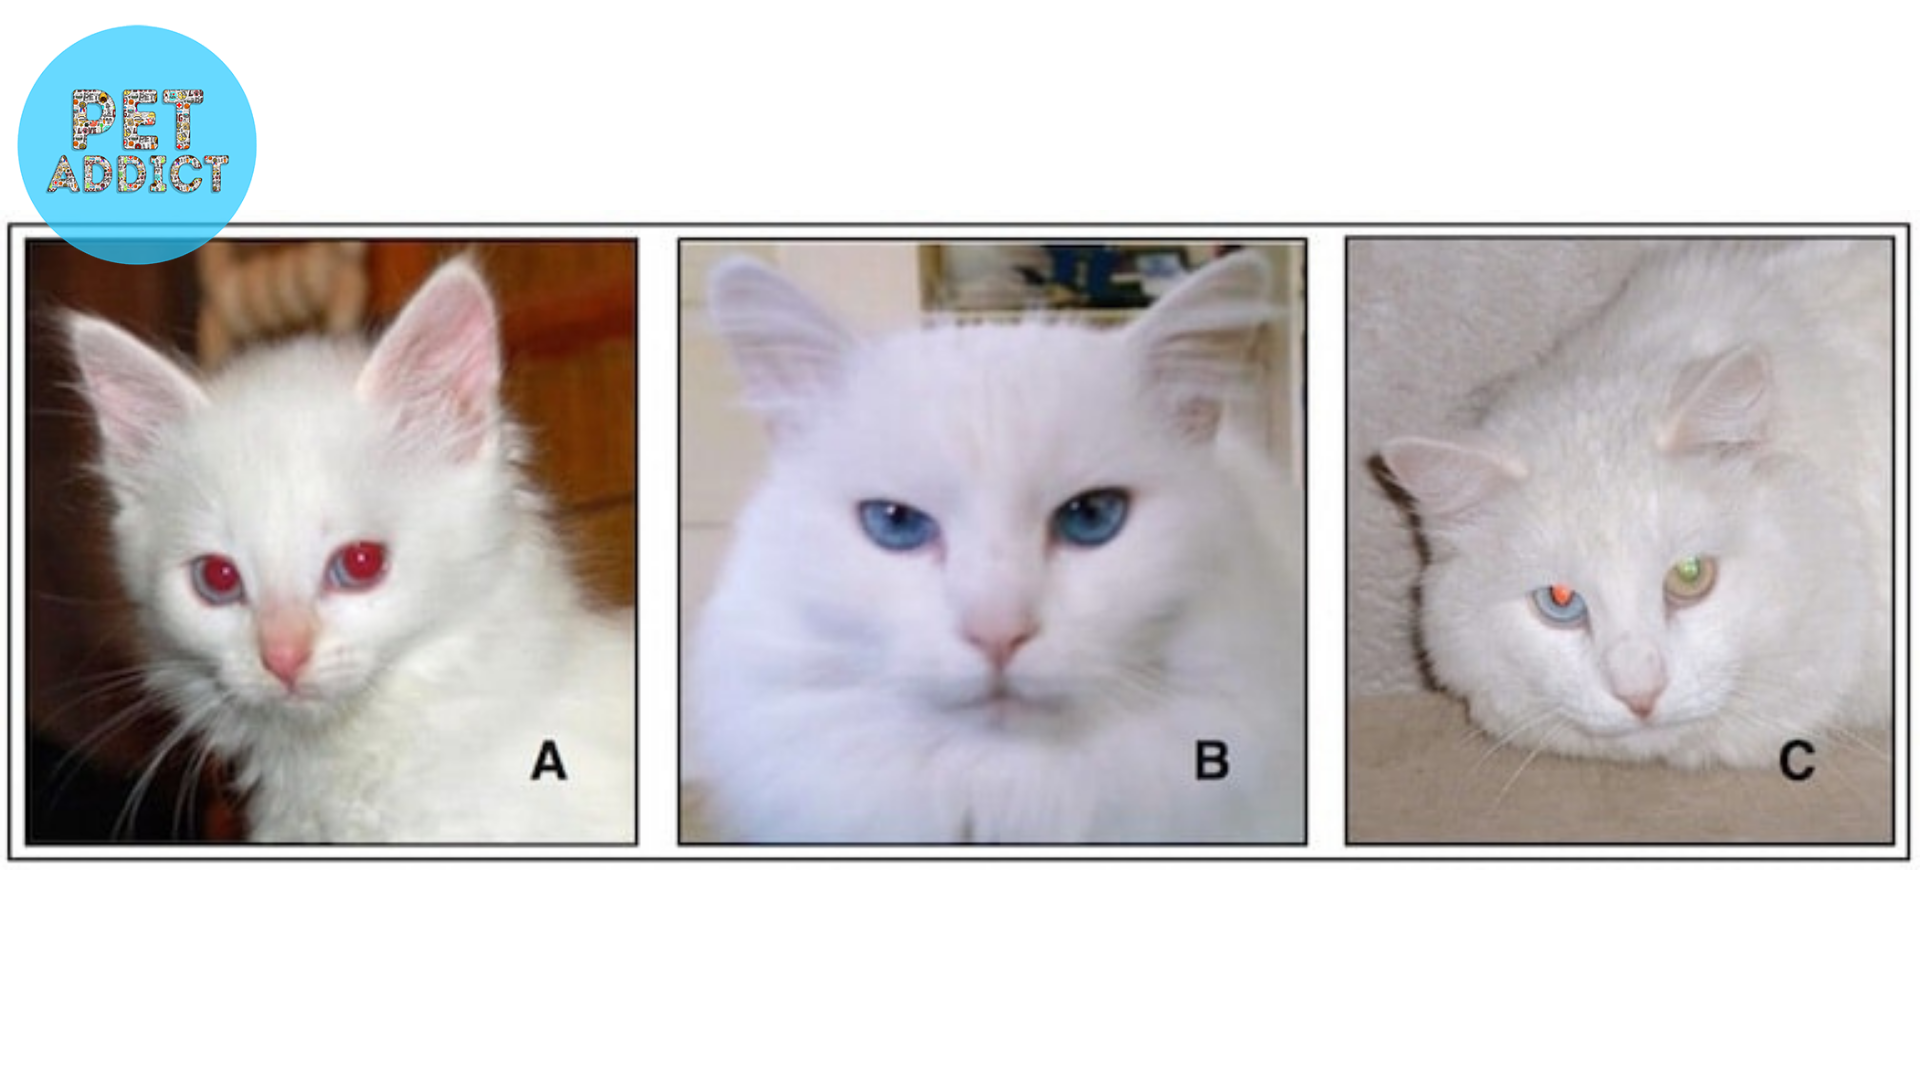 Differentiating Albino Cats from White Cats